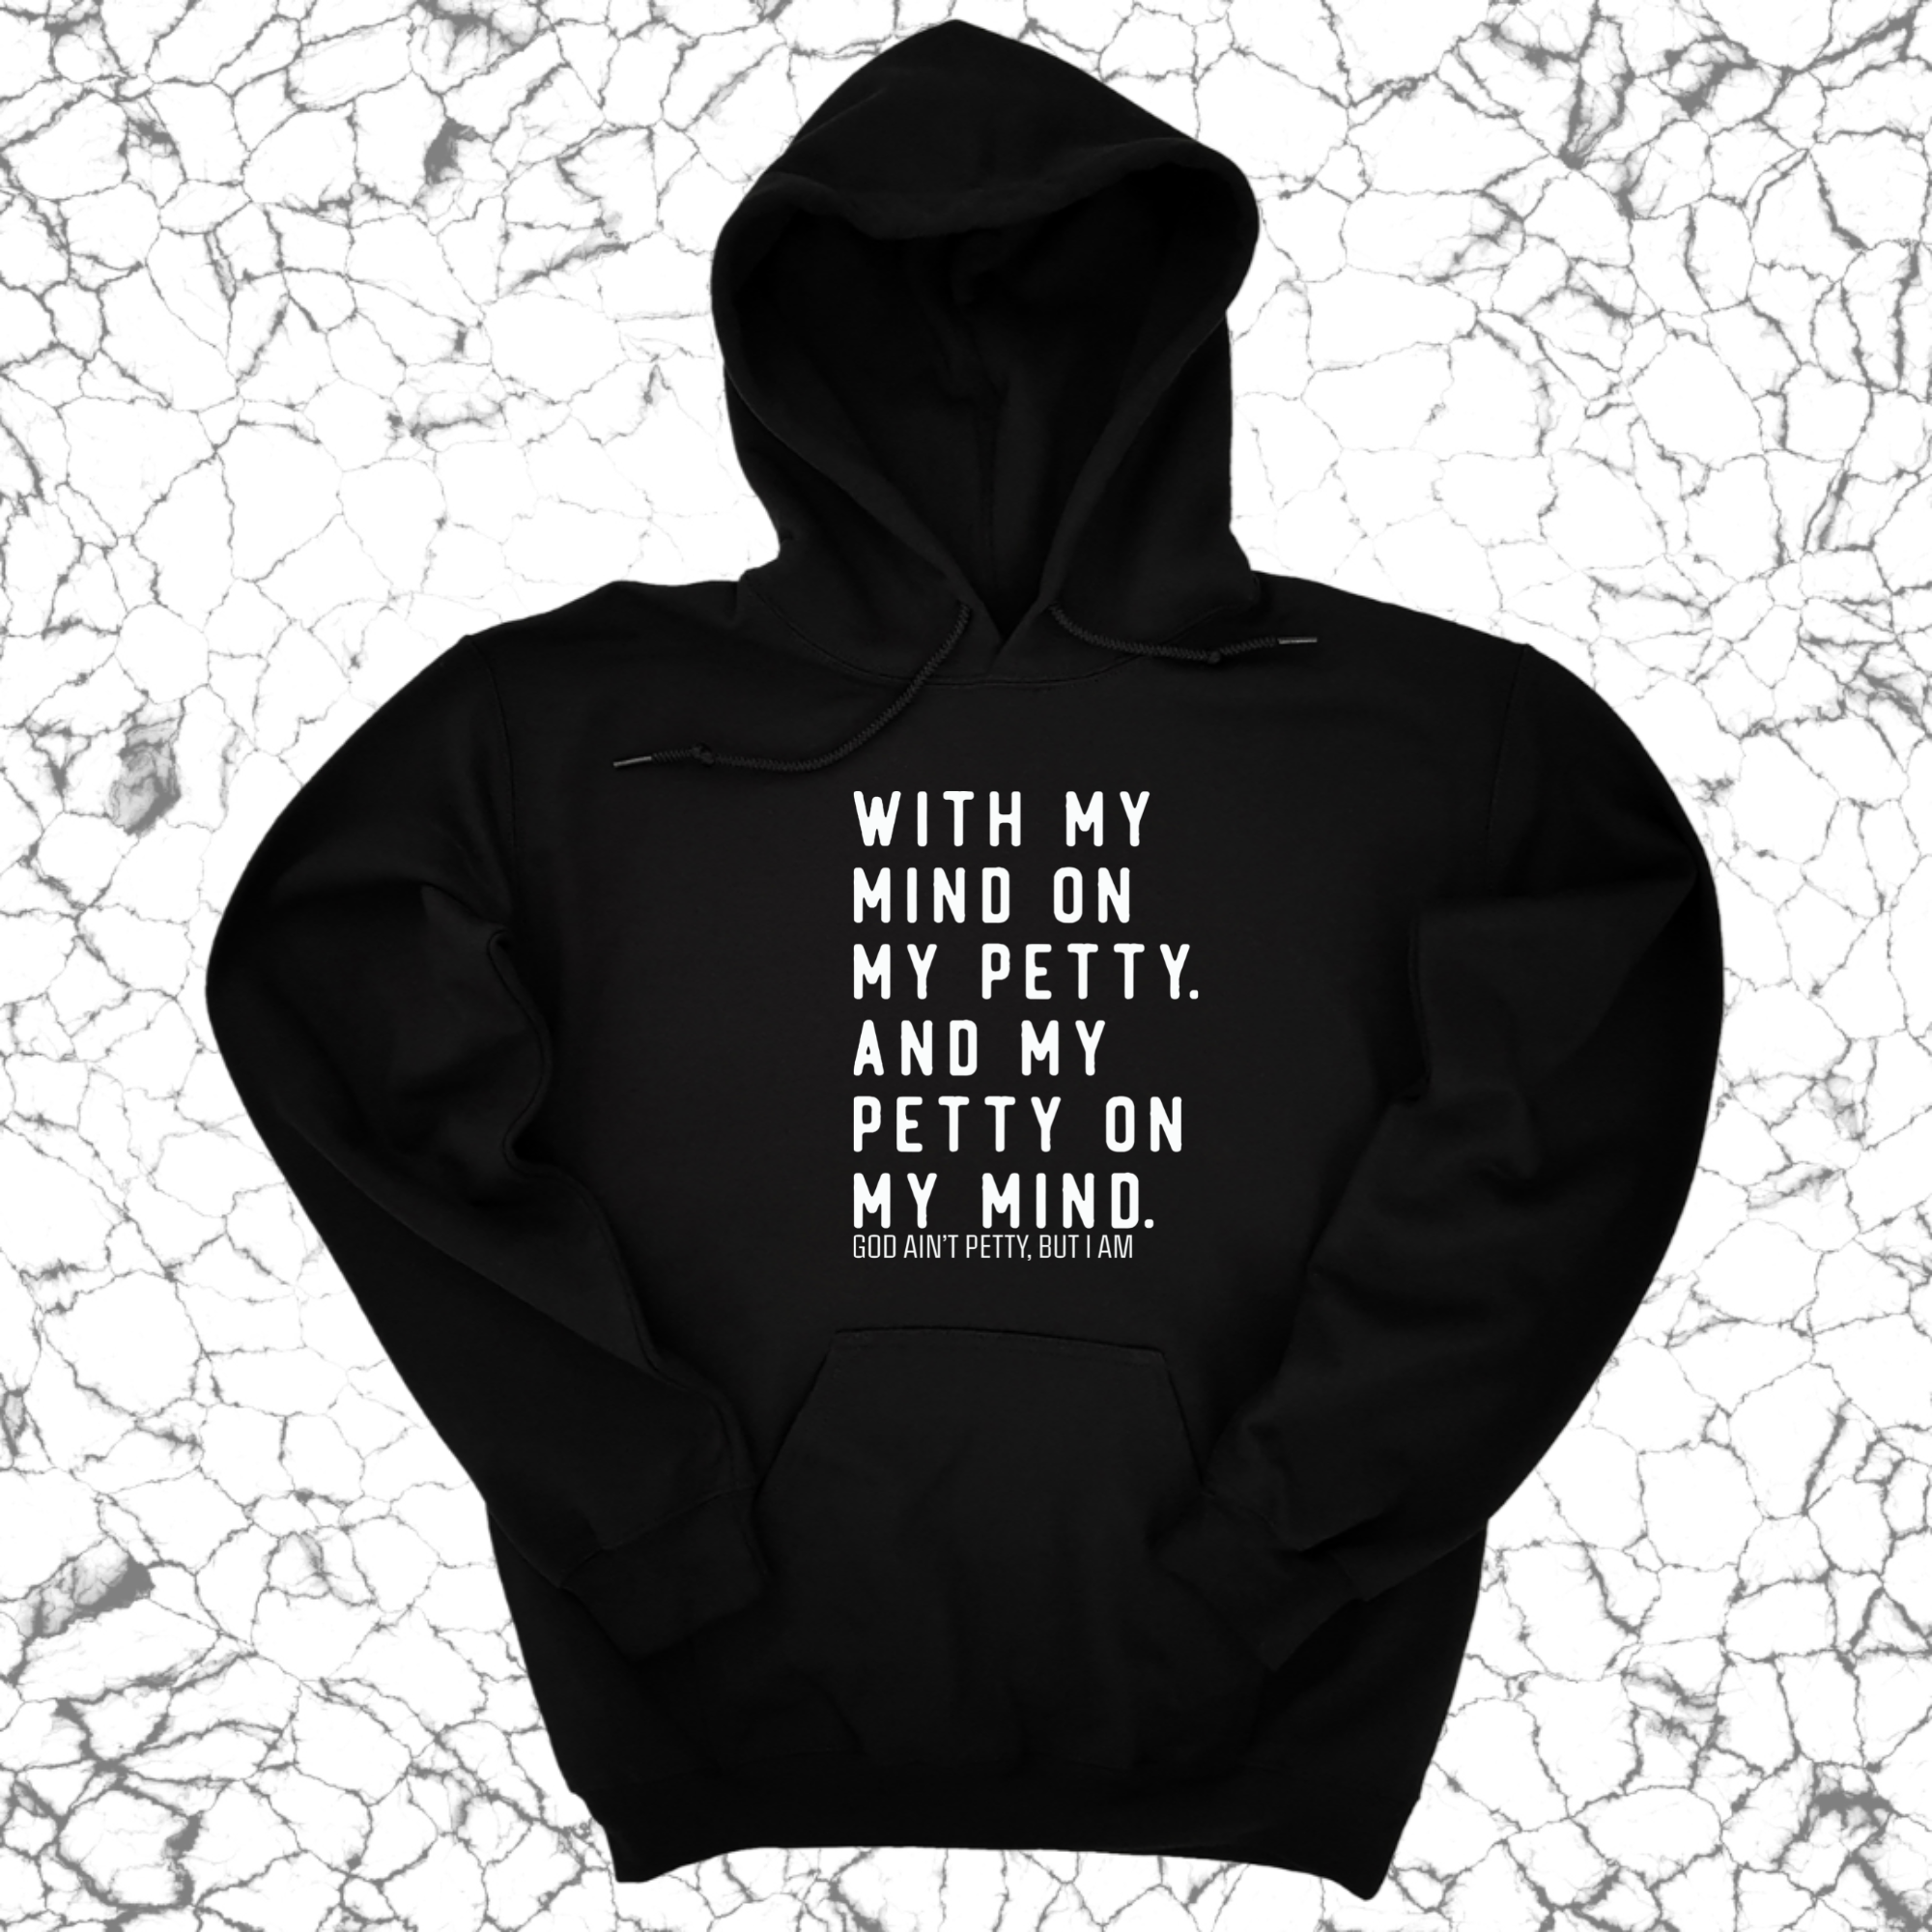 With my Mind on my Petty. And my Petty on my Mind Unisex Hoodie-Hoodie-The Original God Ain't Petty But I Am